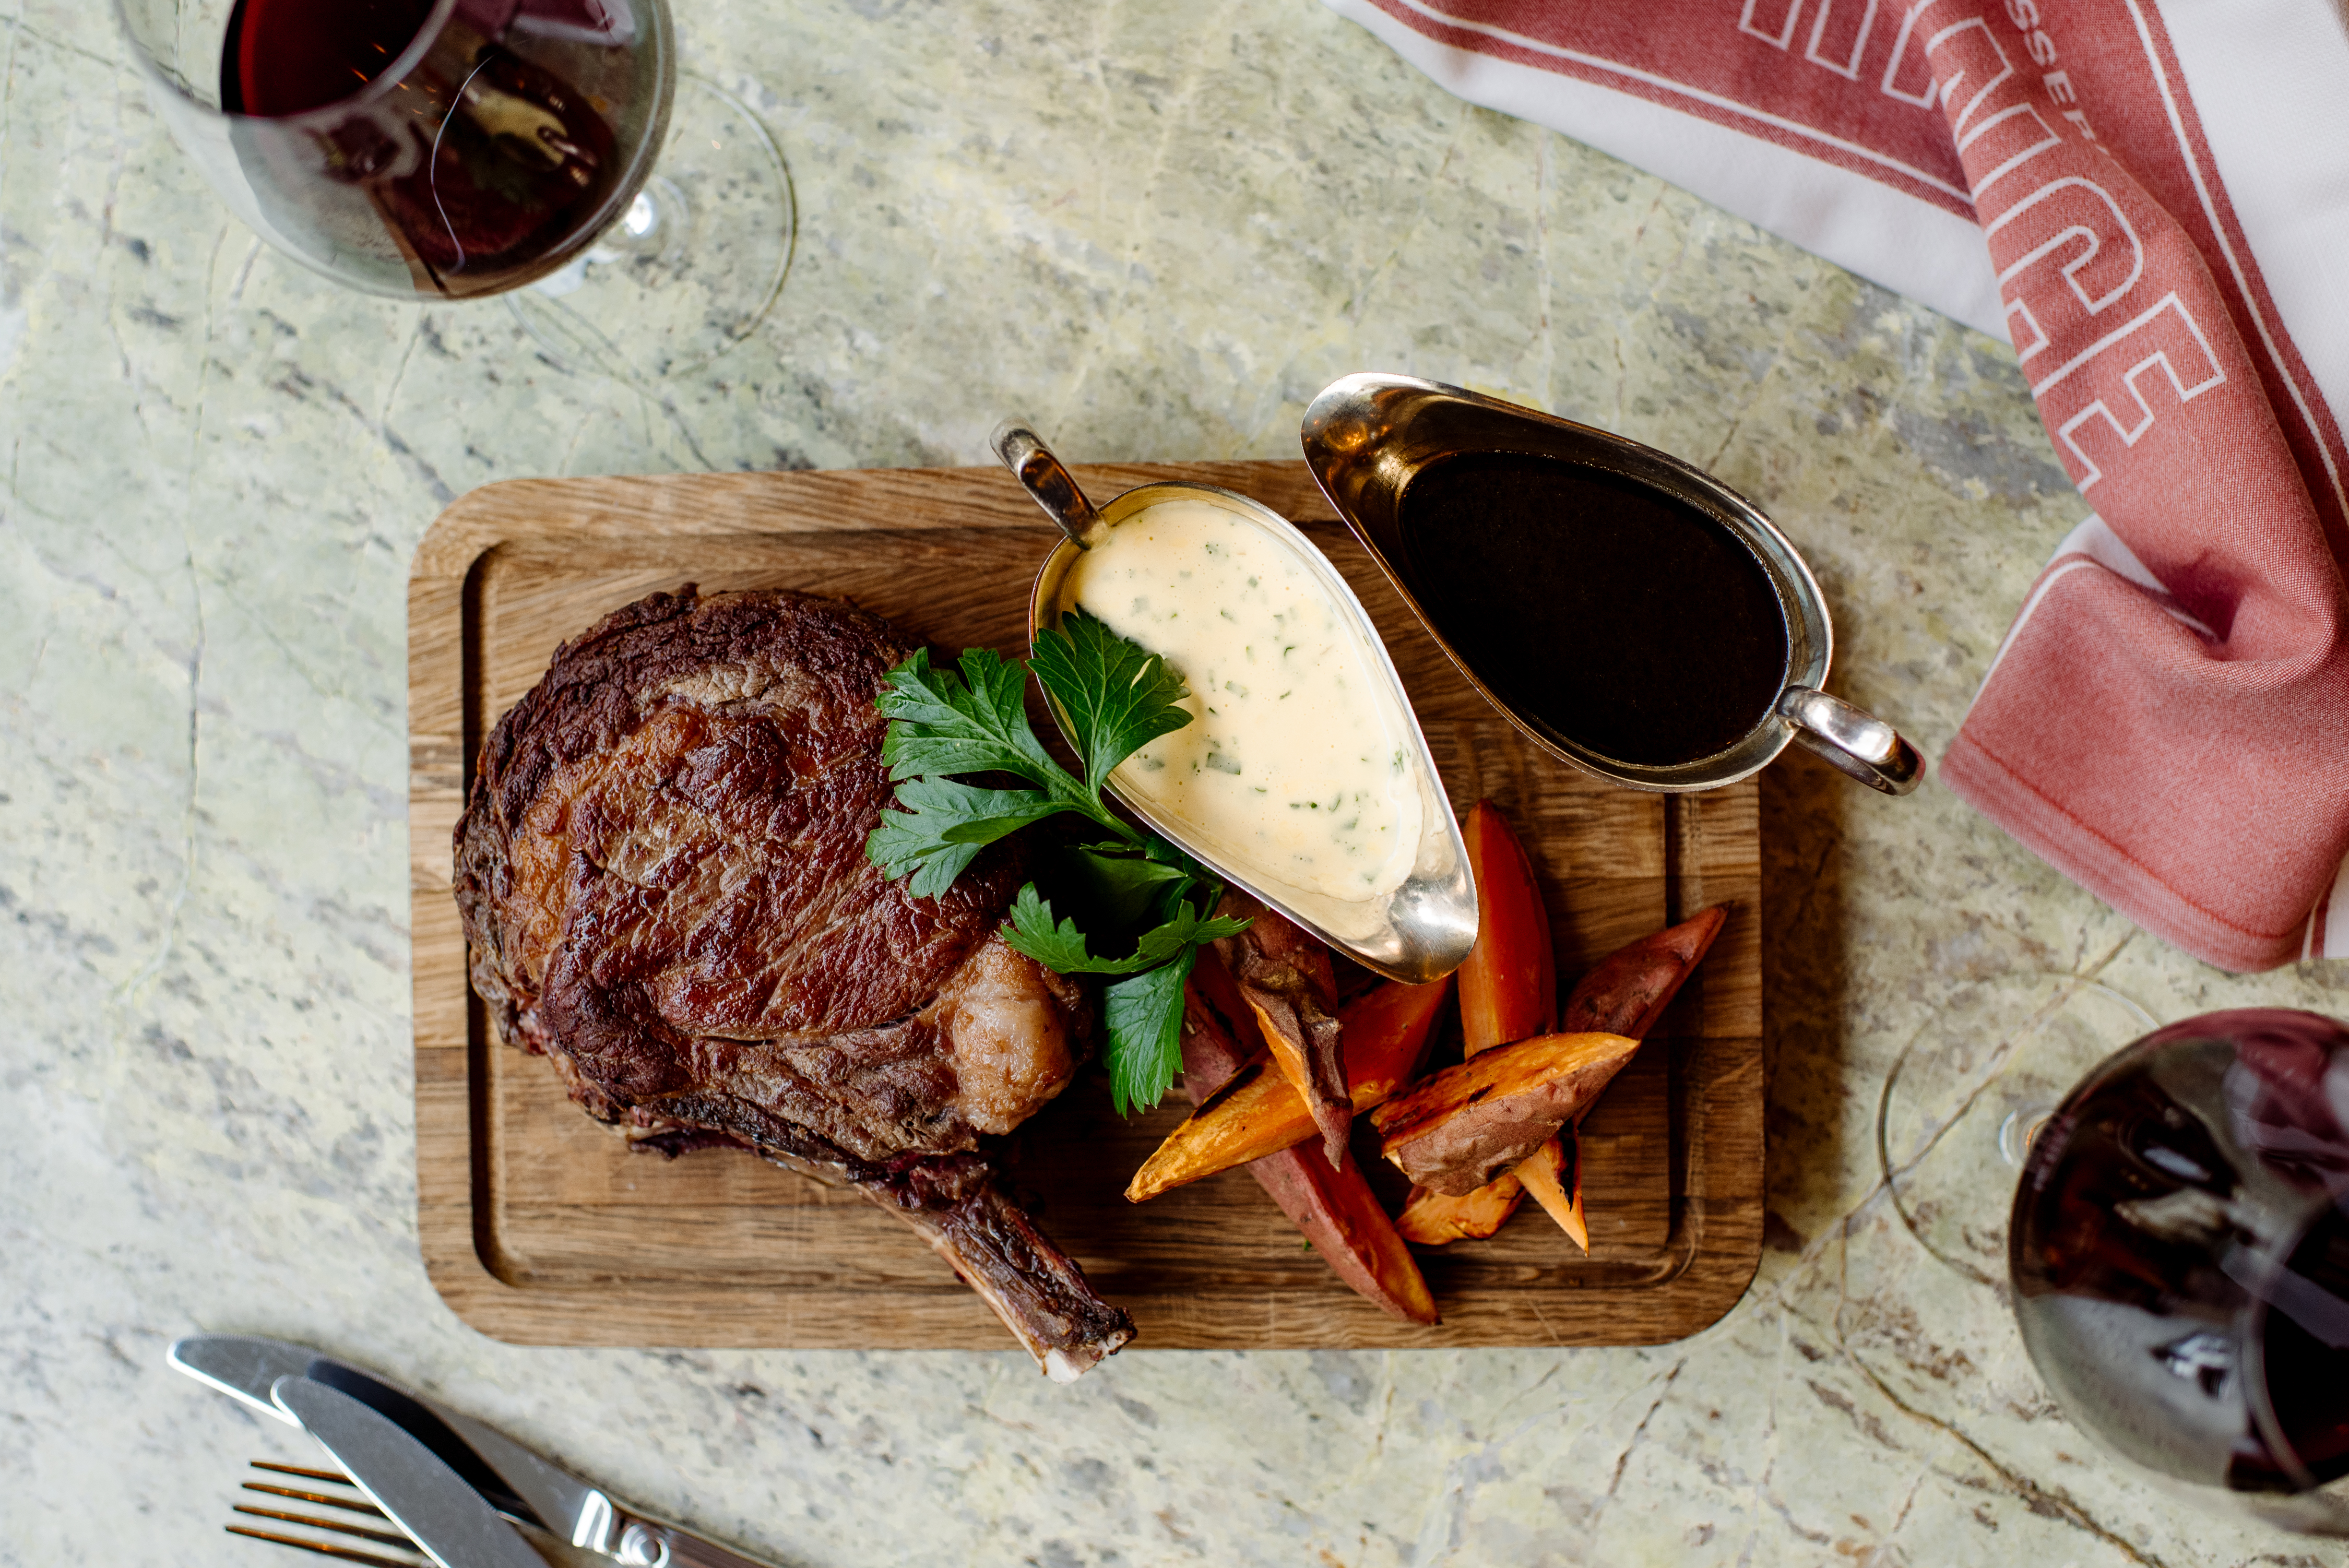 Brasserie Prince by Alain Roux's Scottish rib of beef for two with roasted sweet potato wedges, and Bearnaise sauce